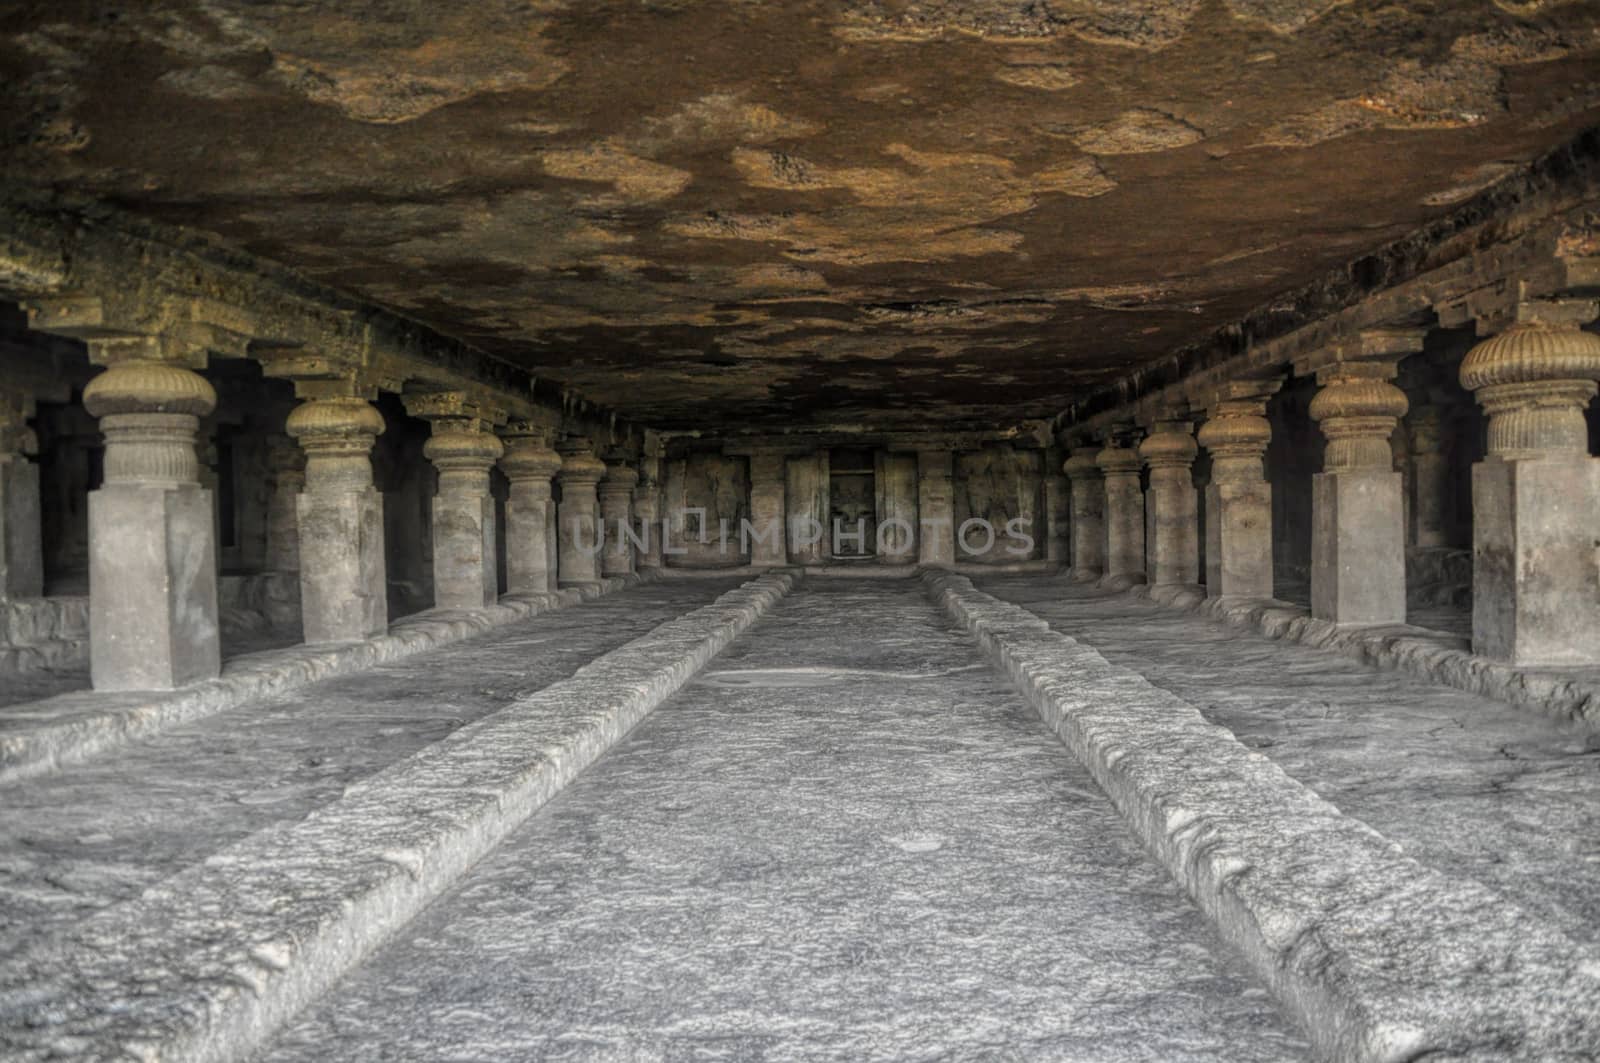 Inside of Ellora caves, unseco archaeological site in India